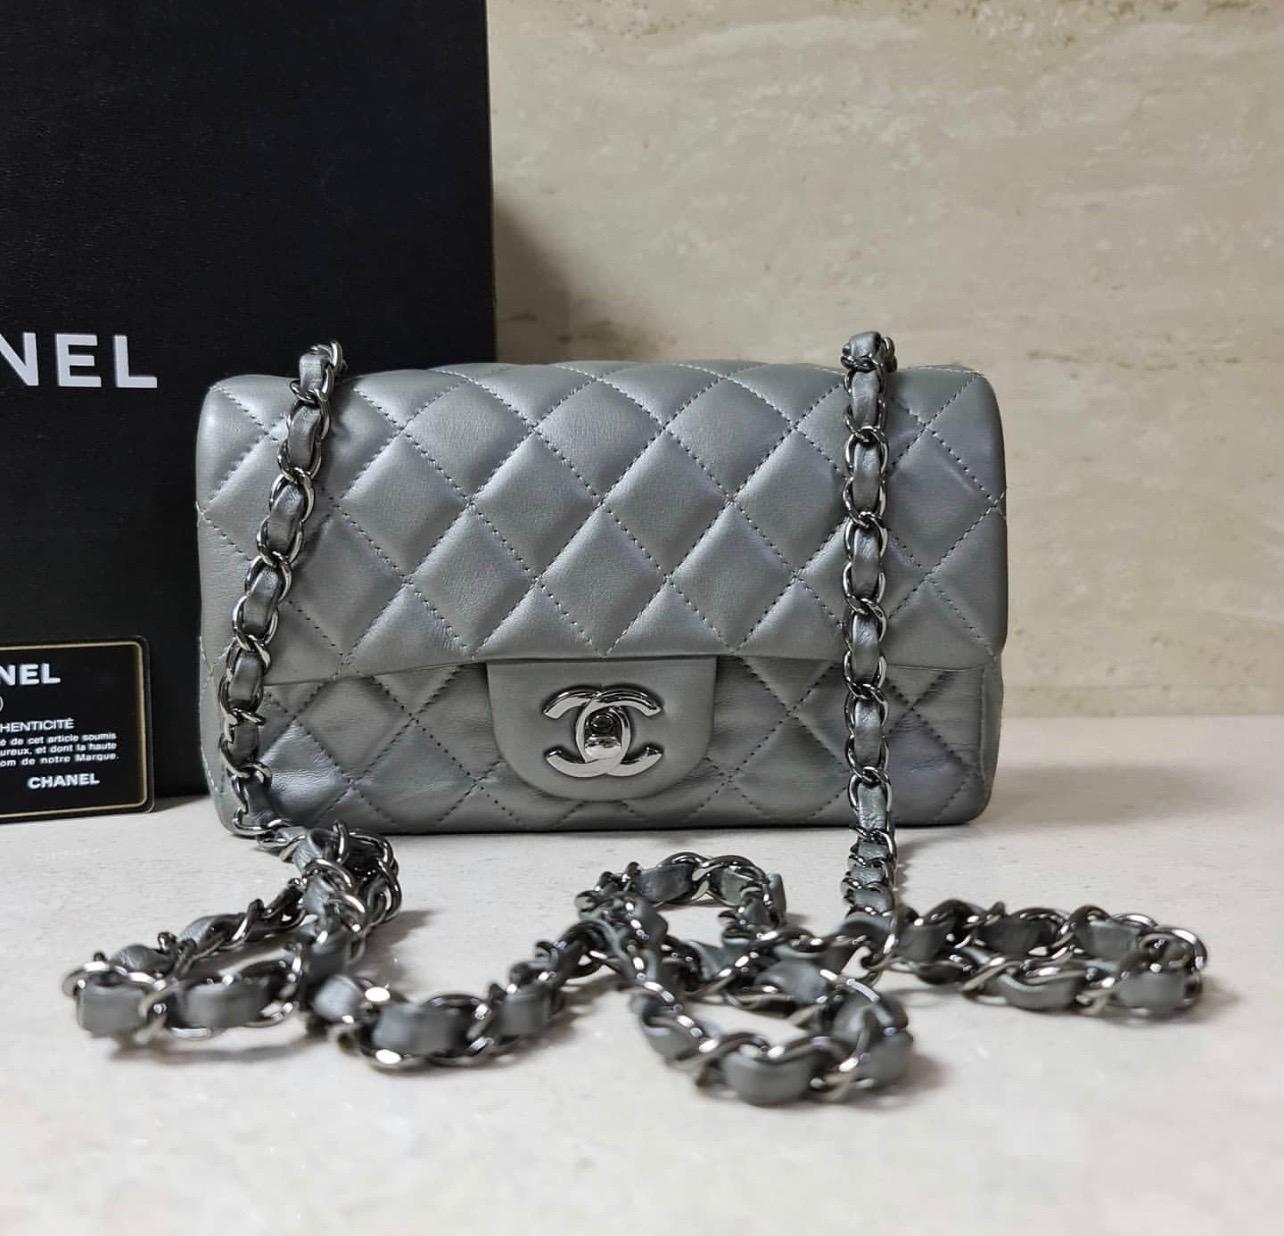 This authentic CHANEL Metallic Lambskin Quilted Mini Rectangular Flap Silver bag features a polished silver chain link shoulder strap threaded with leather, a rear pocket and a front polished silver Chanel CC turn lock. 
This opens to a matching